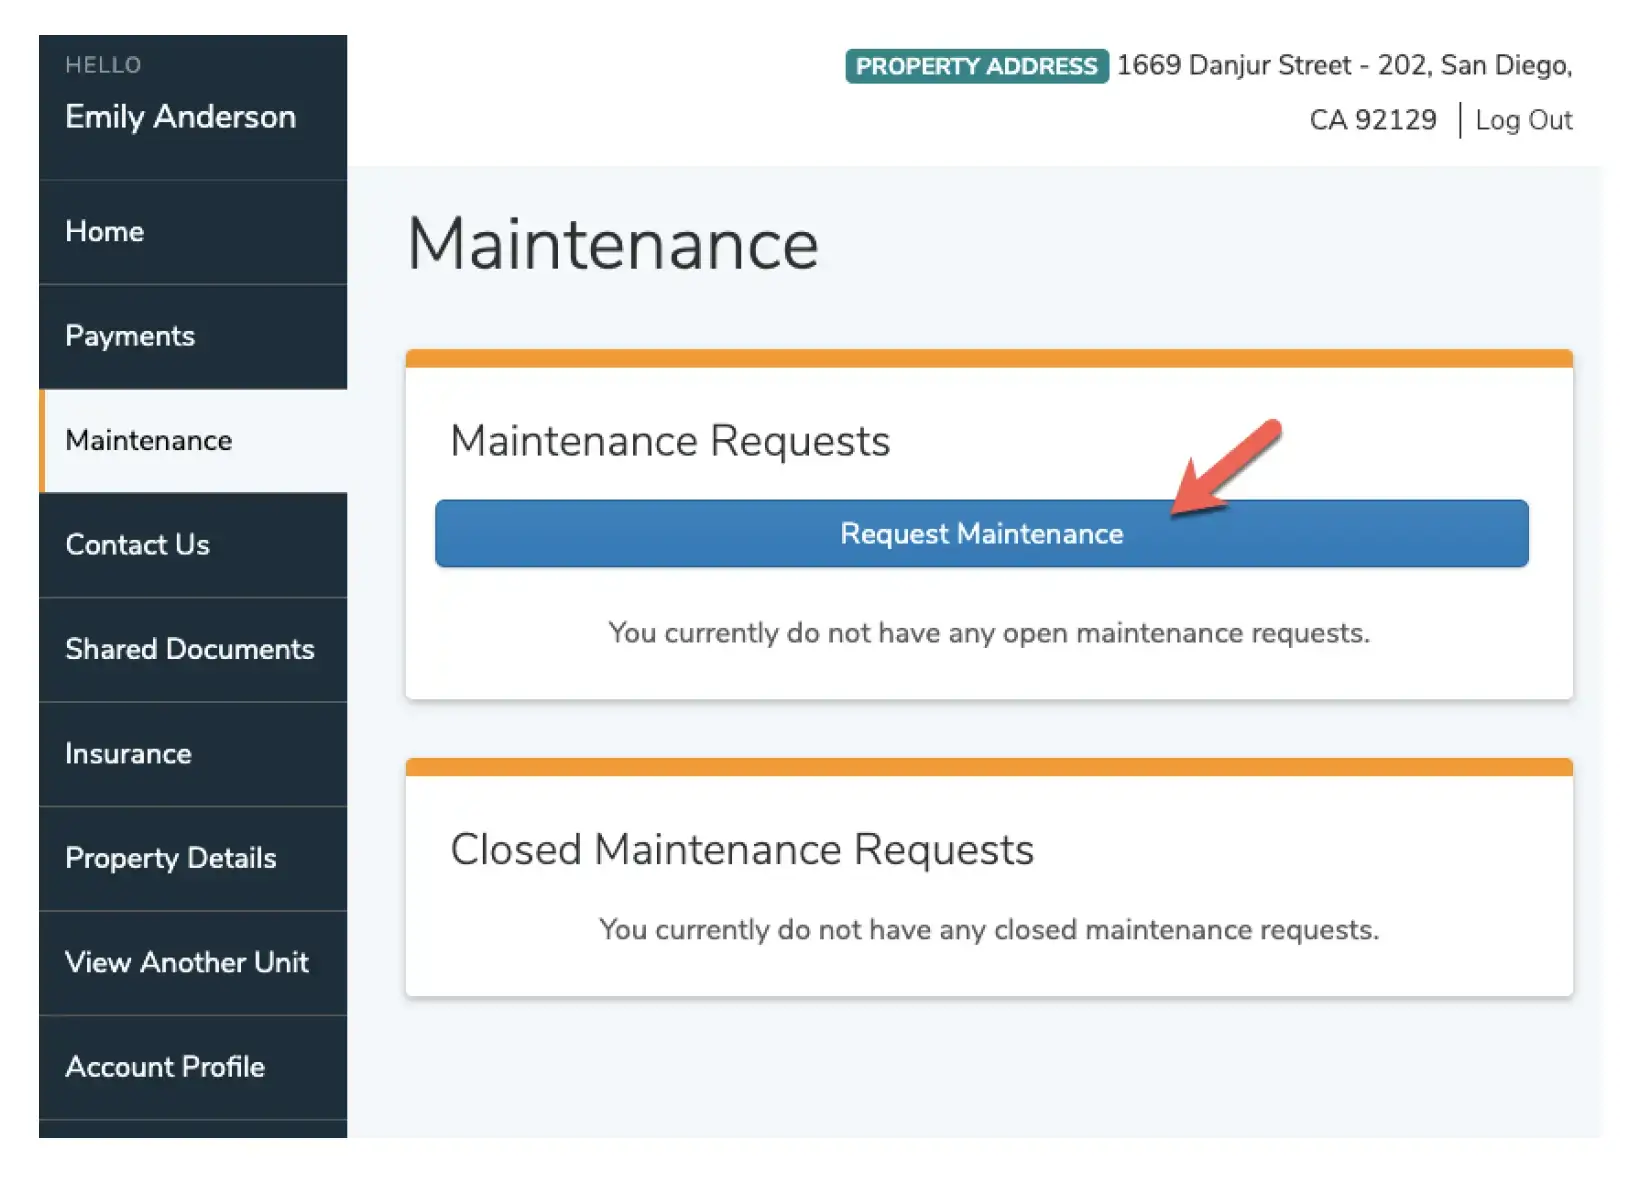 How to Submit a Maintenance Request-Img1